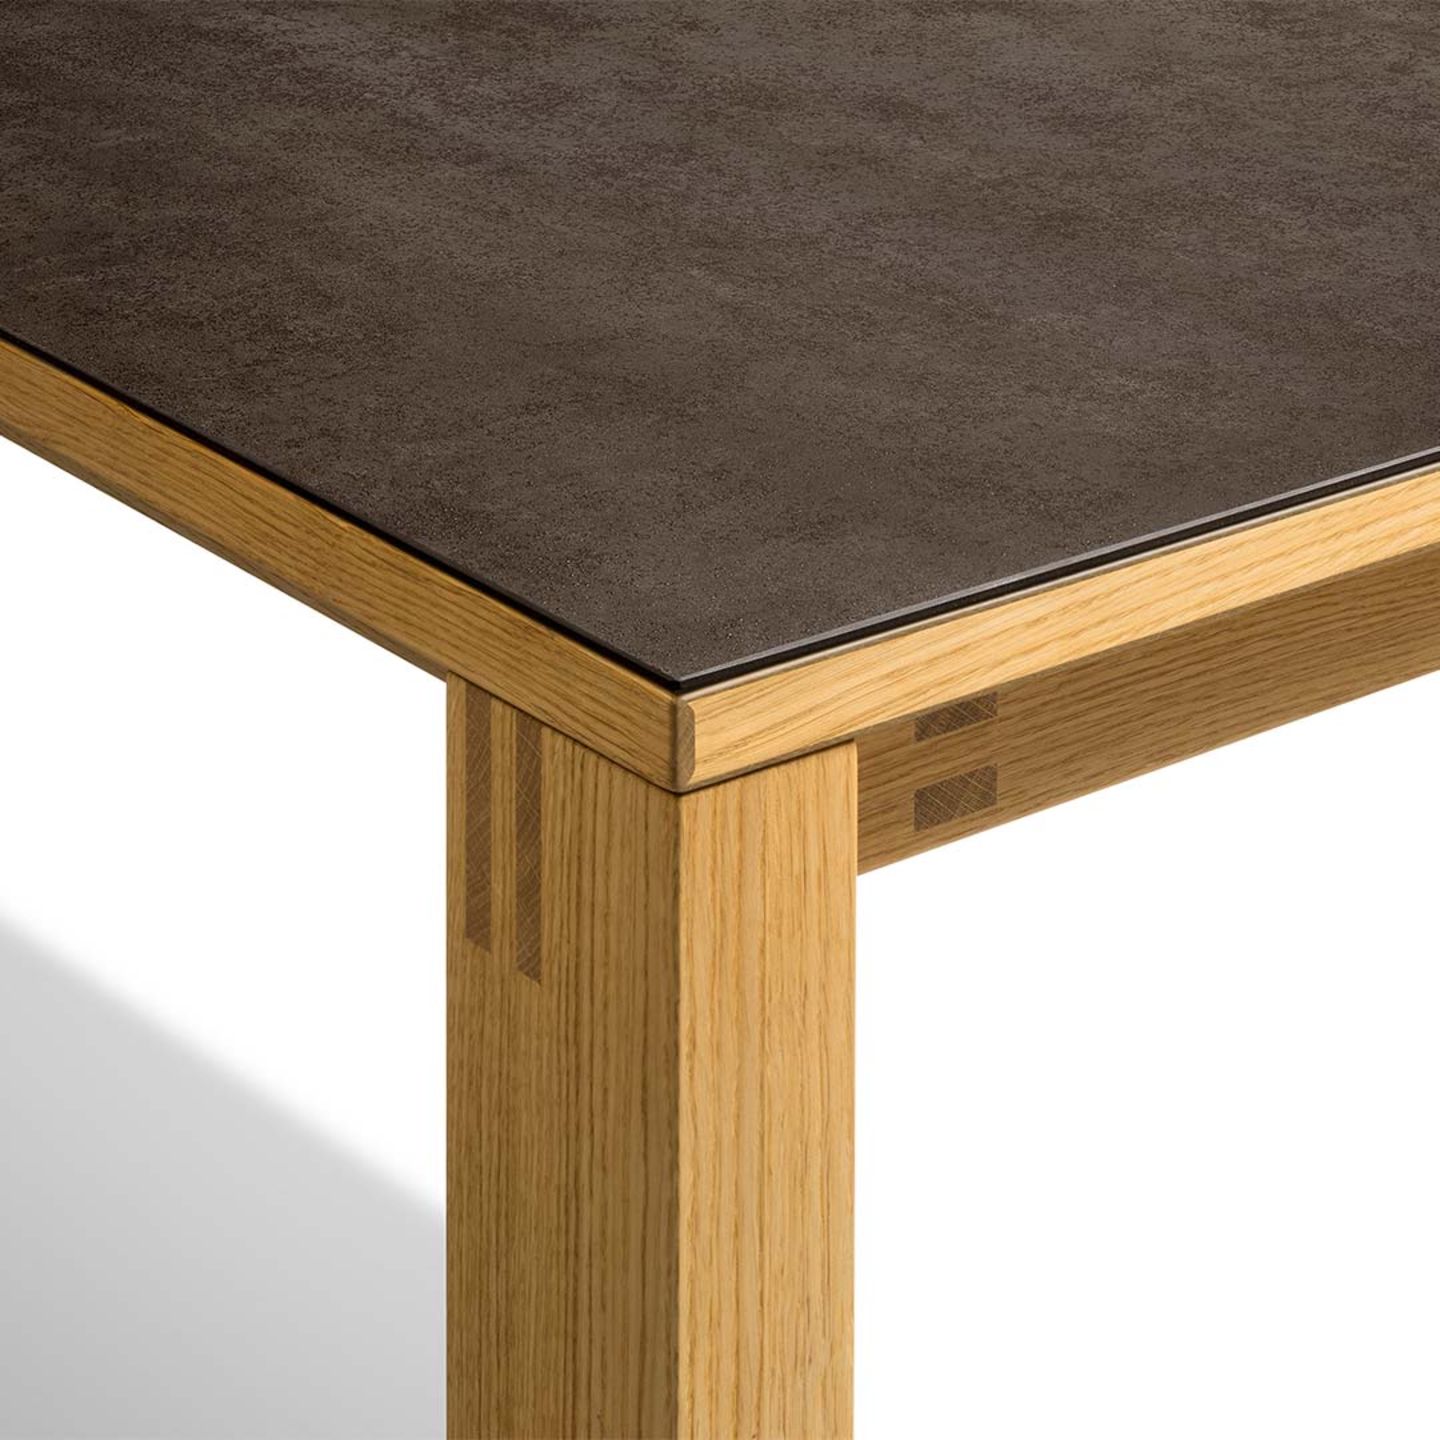 magnum extendable table with slot-and-pin connection with ceramic surface